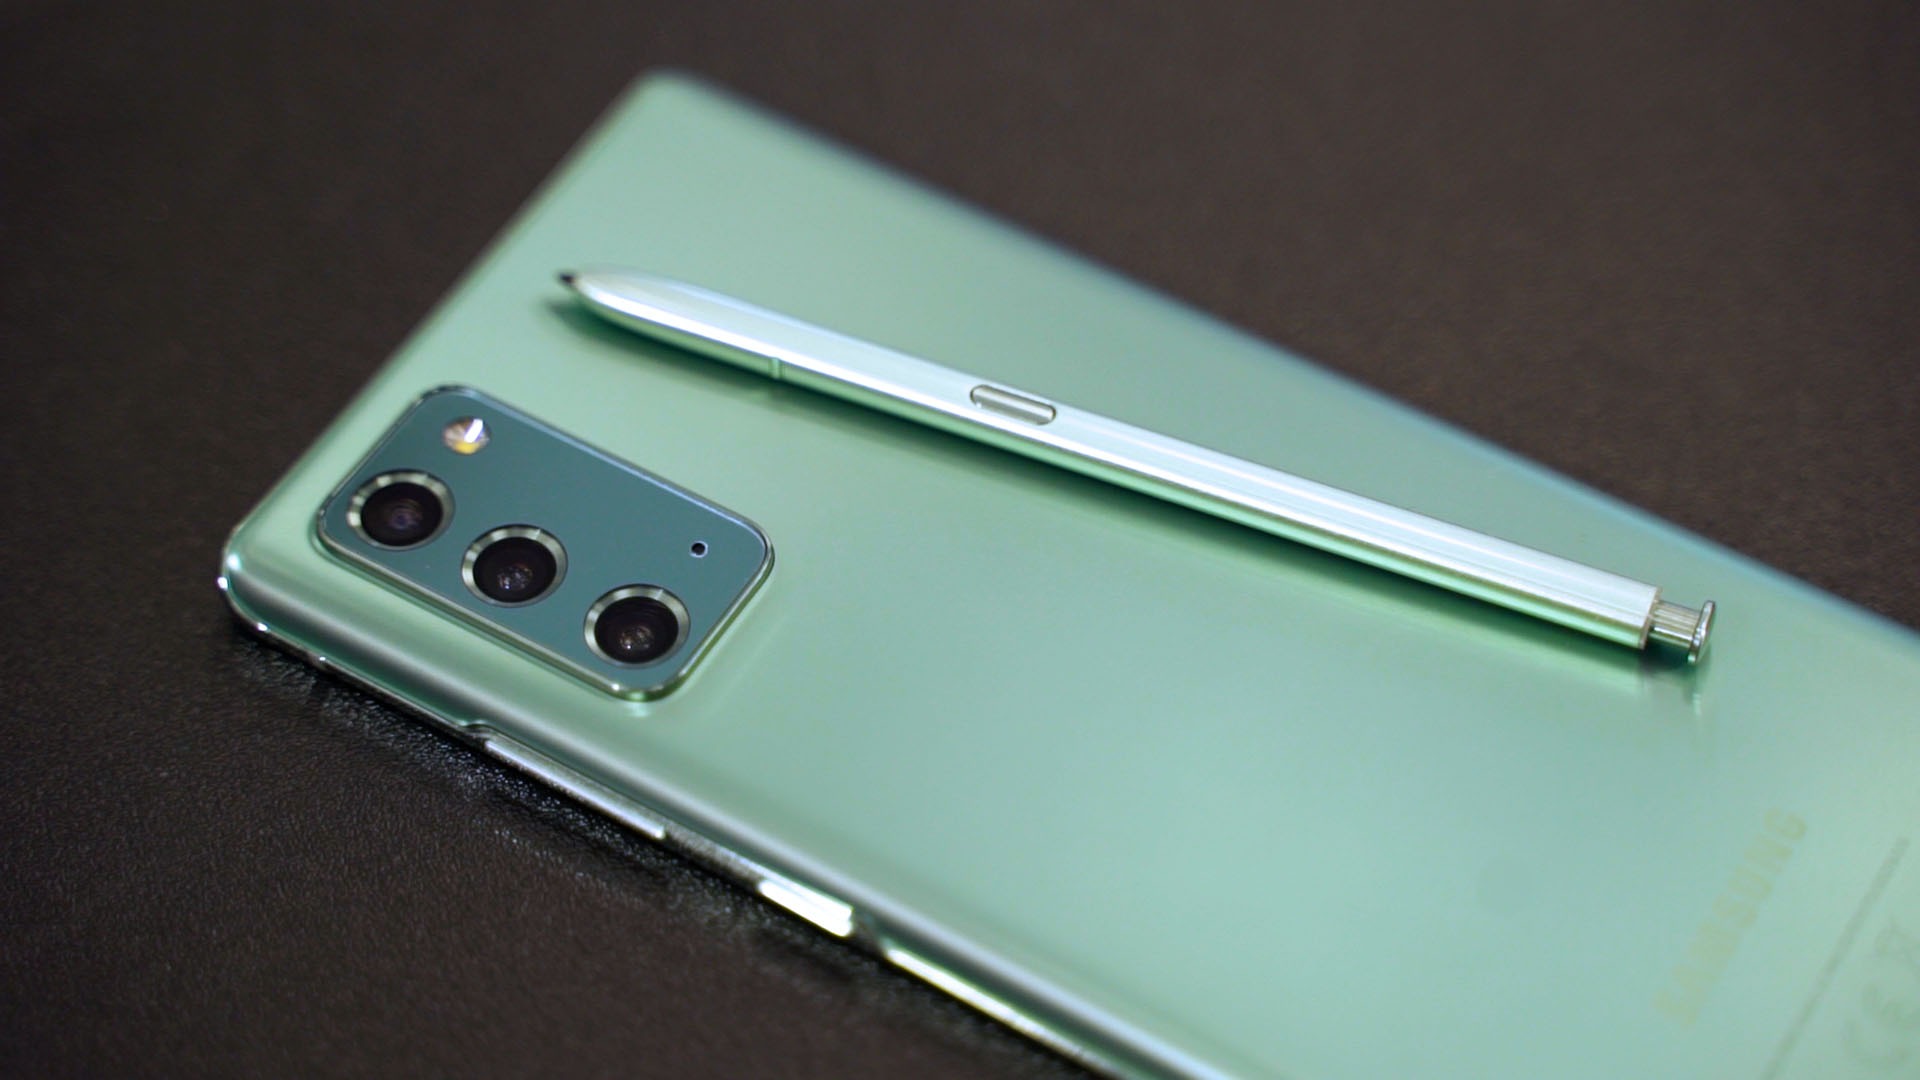 Galaxy Note 20 in Mystic Green launches in South Korea later this week